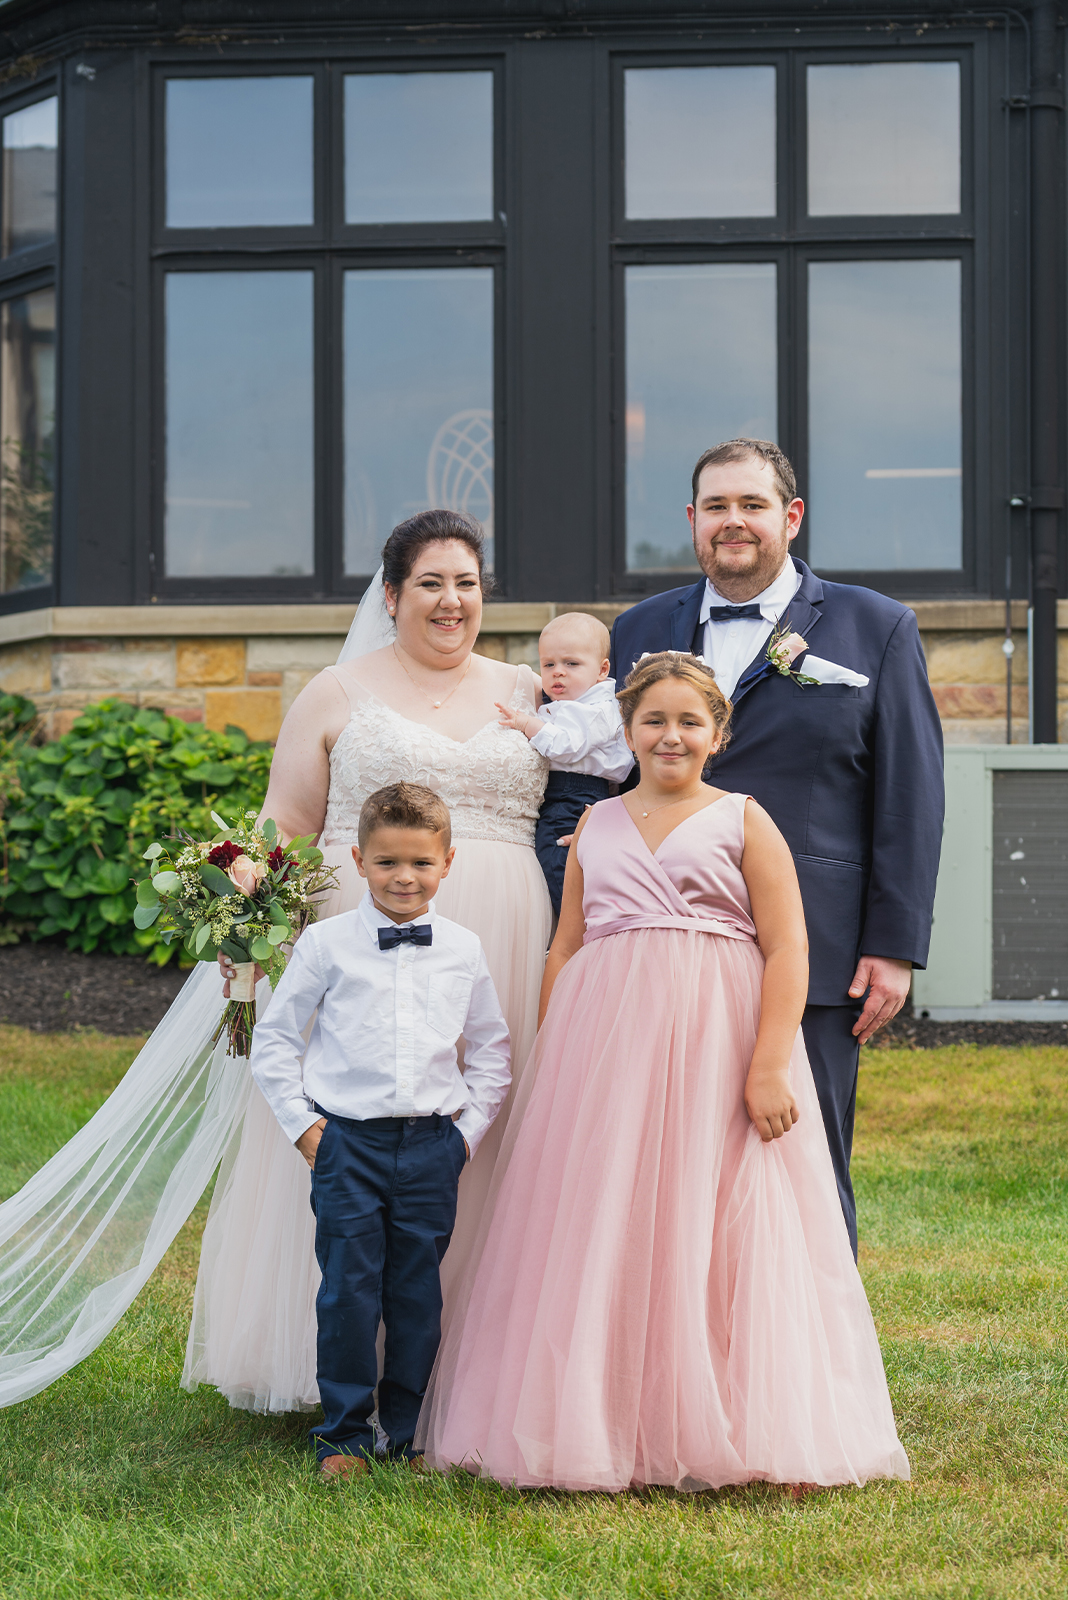 Bride and groom with ring bearer and flower girl, bridal party portrait, cute, sweet, wedding portrait, outdoor September wedding ceremony at Punderson Manor Lodge & Conference Center, Newbury Township OH